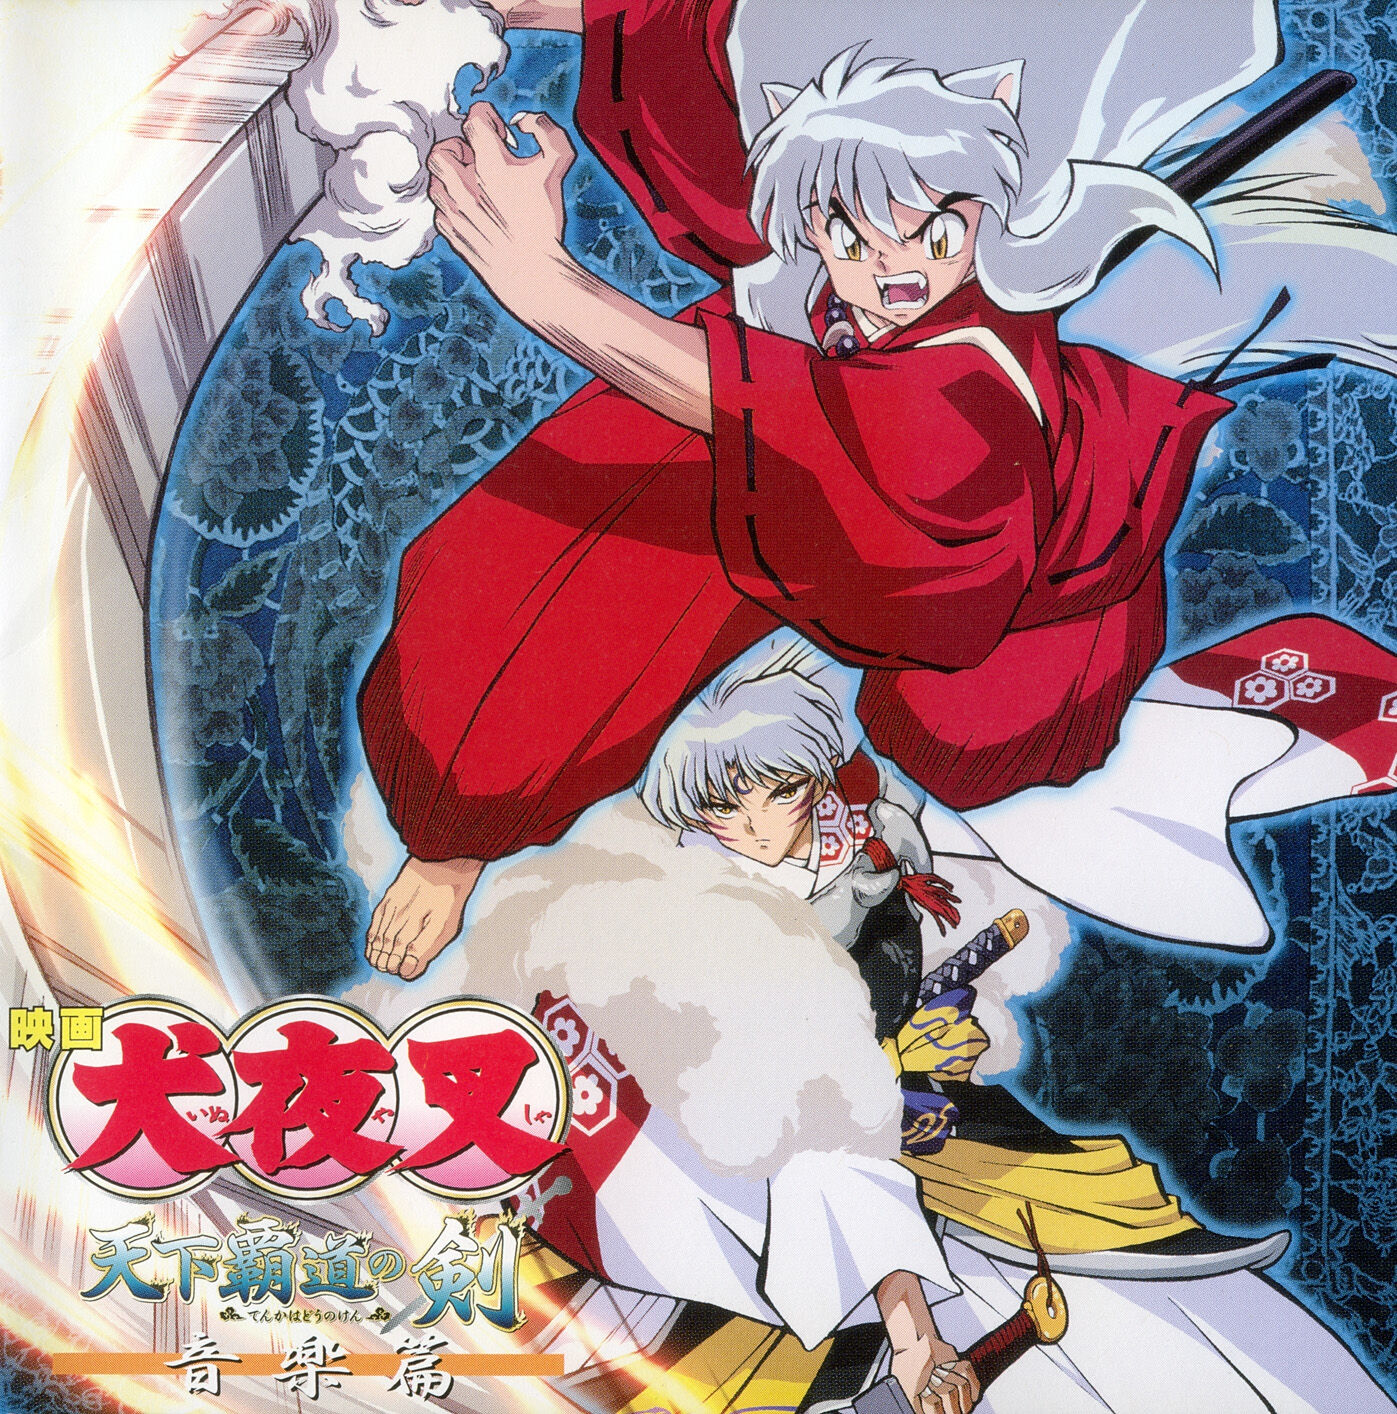 InuYasha  openings, endings & OST by AniPlaylist - Apple Music